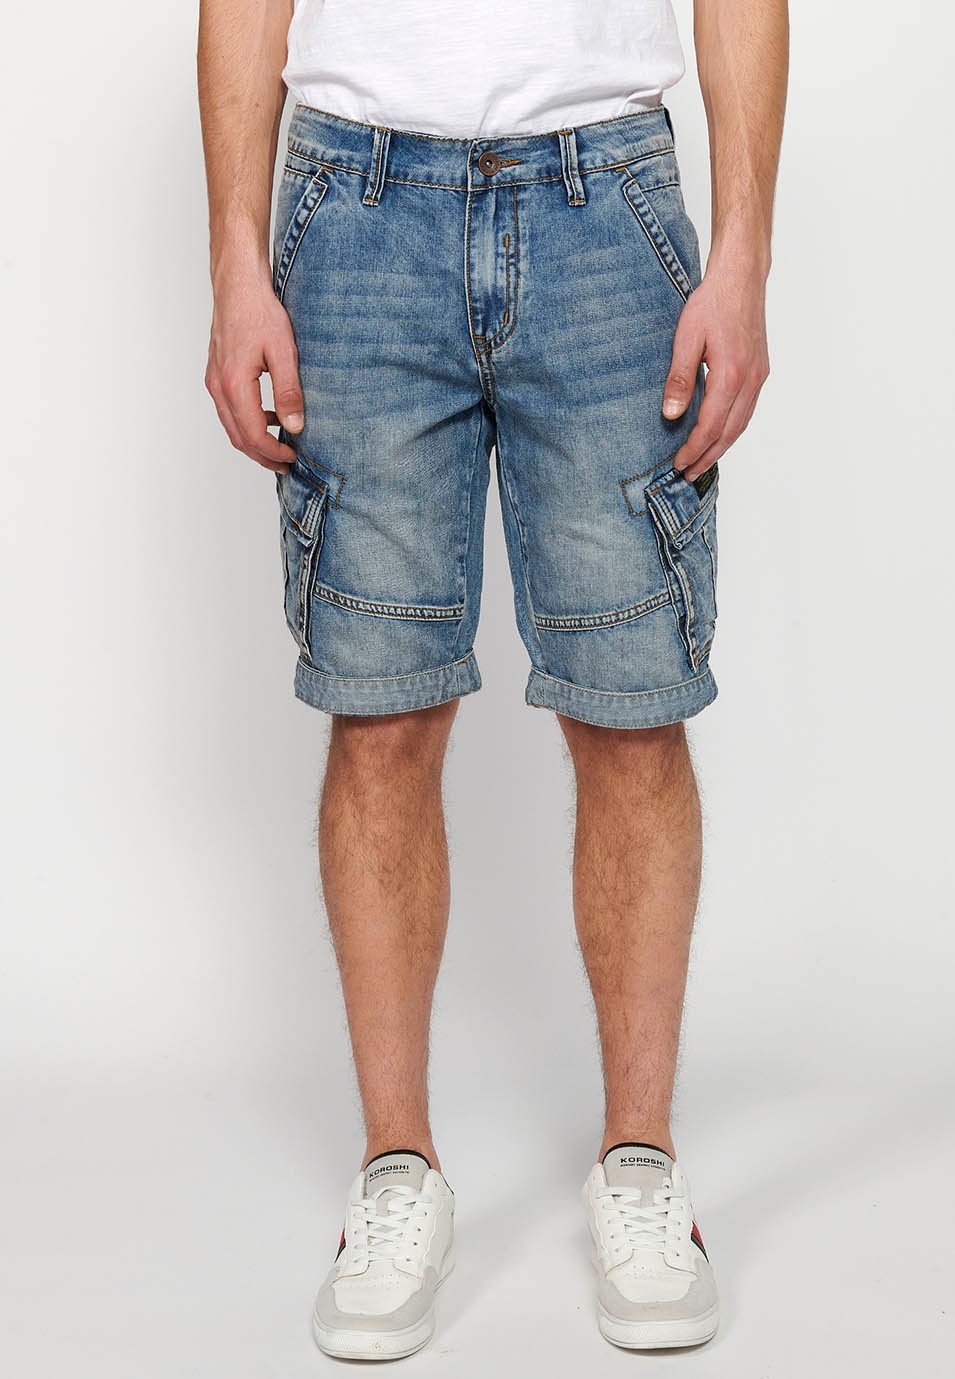 Denim Bermuda cargo shorts with front zipper and button closure with five pockets, one blue pocket pocket for Men